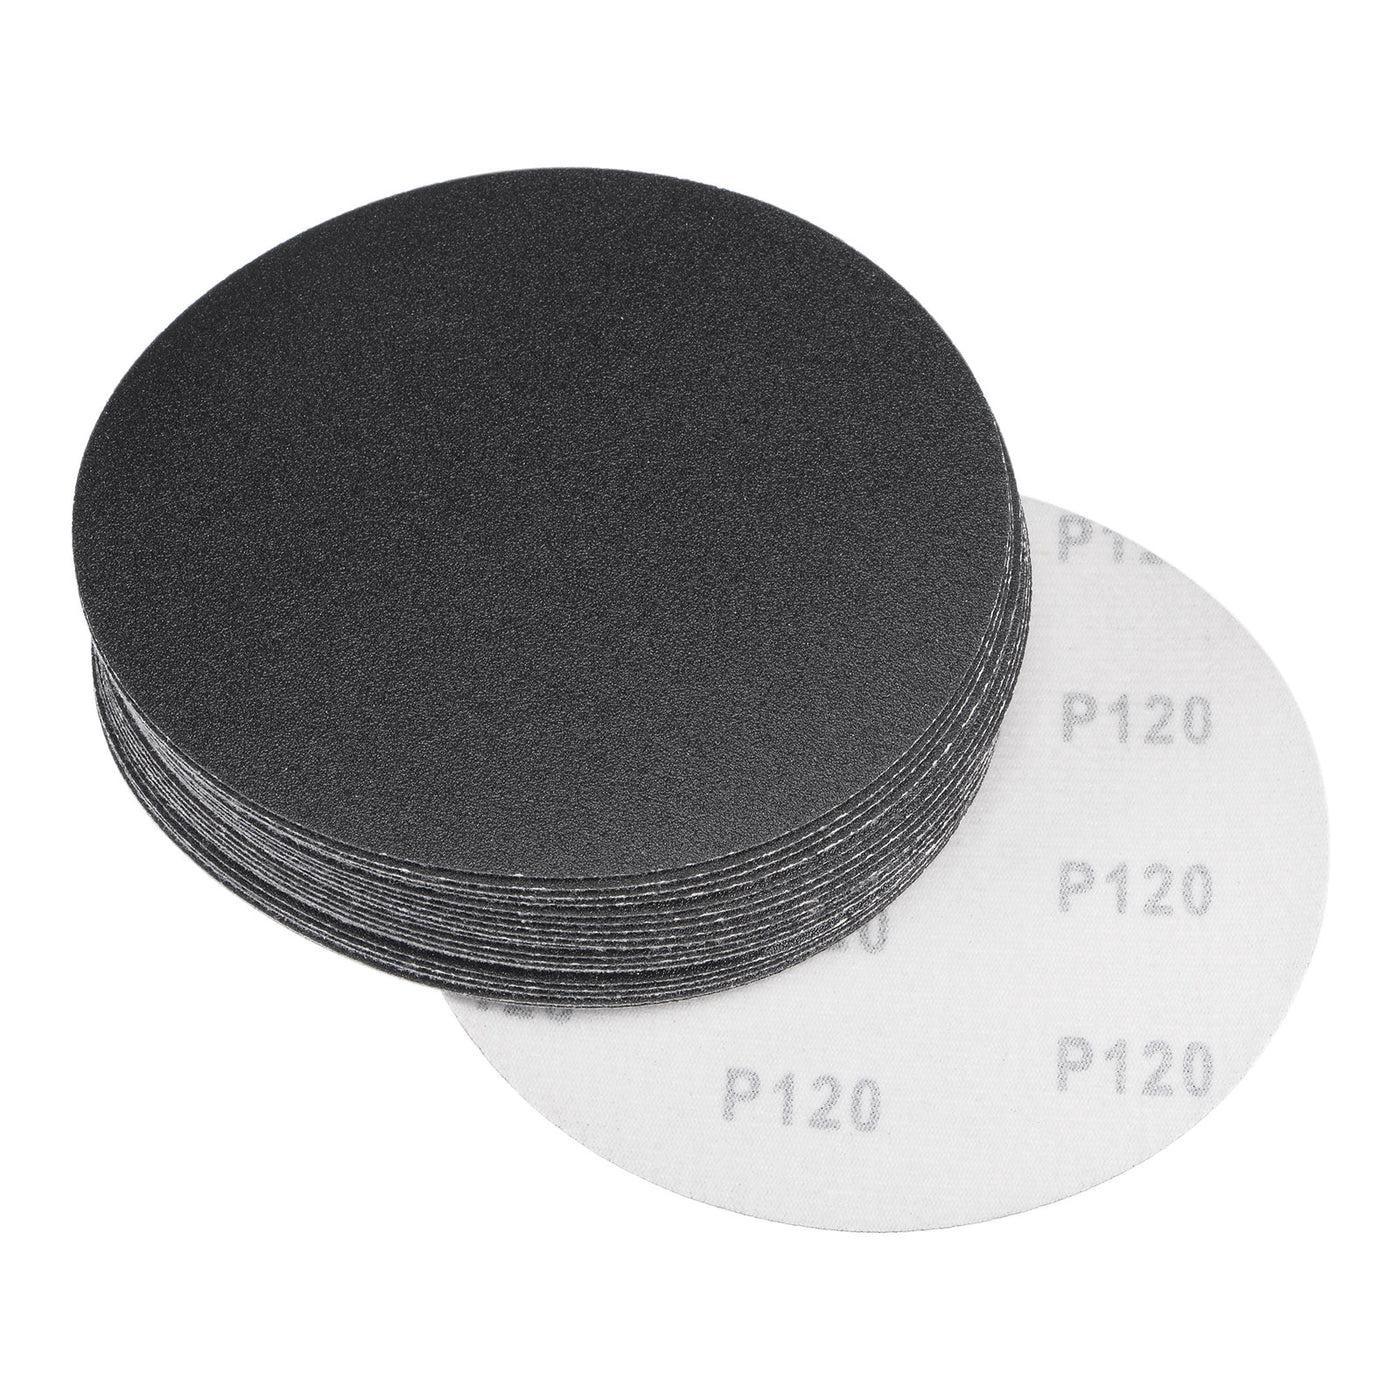 Uxcell Uxcell 6 Inch Sanding Disc 60Grit Hook and Loop Silicon Carbide C-Weight Backing 20Pcs